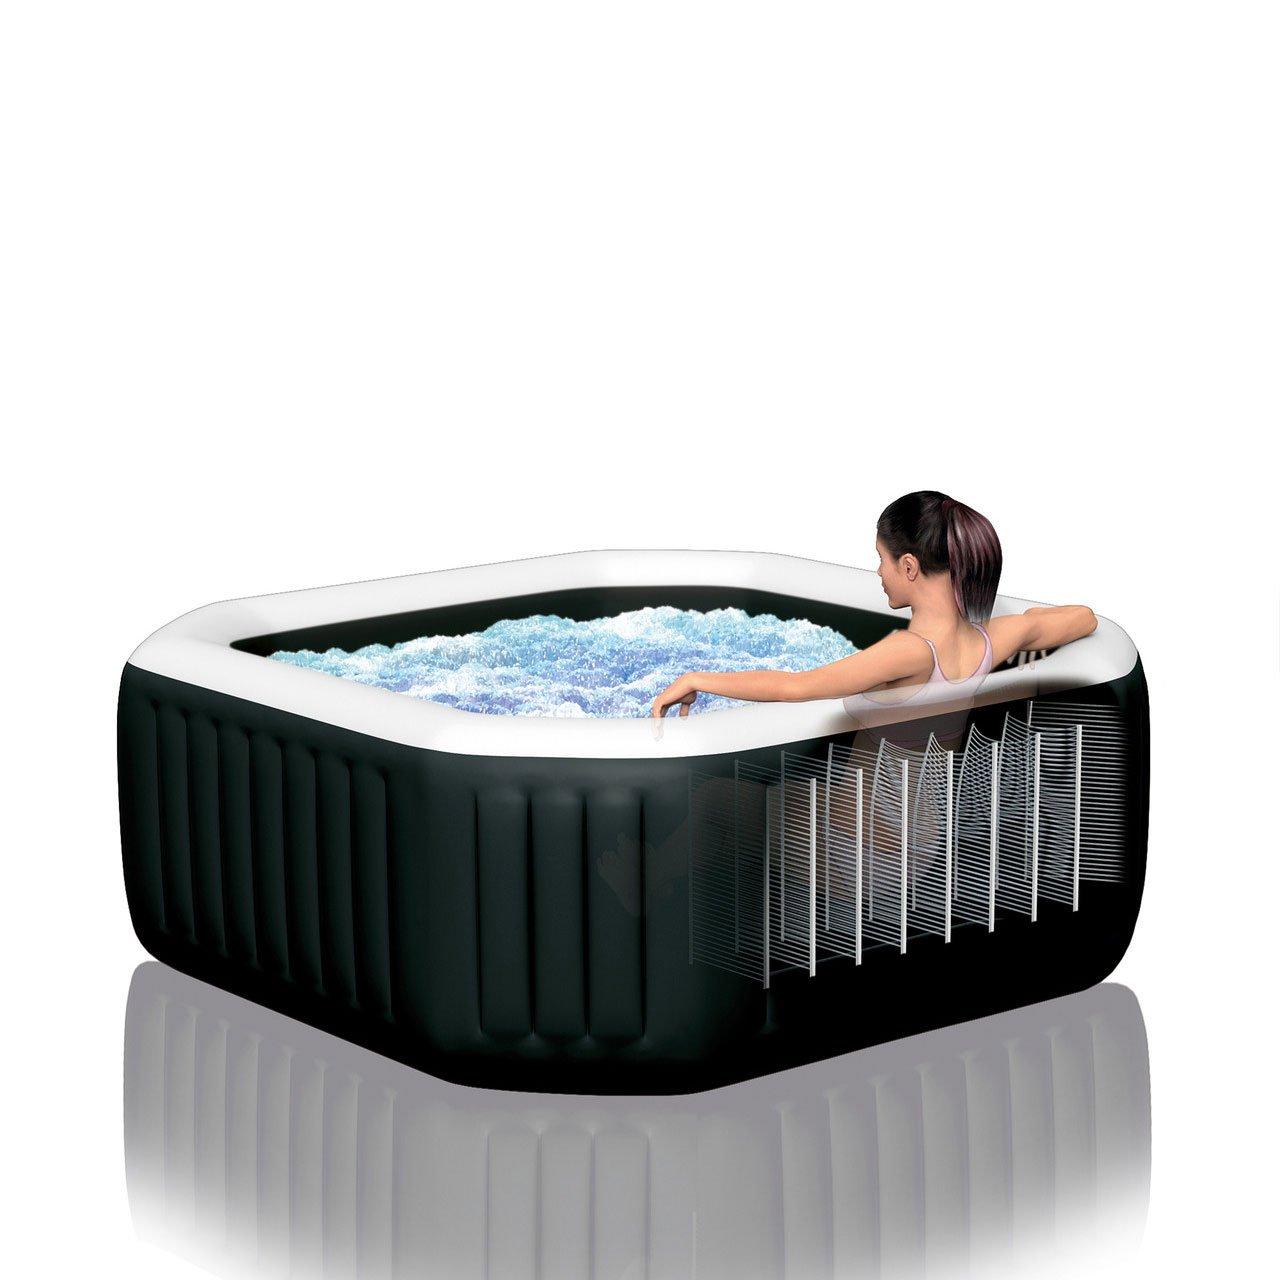 Intex  79 X 28 PureSpa Jet and Bubble Deluxe Inflatable Hot Tub Set with Energy Efficient Cover 4-Person